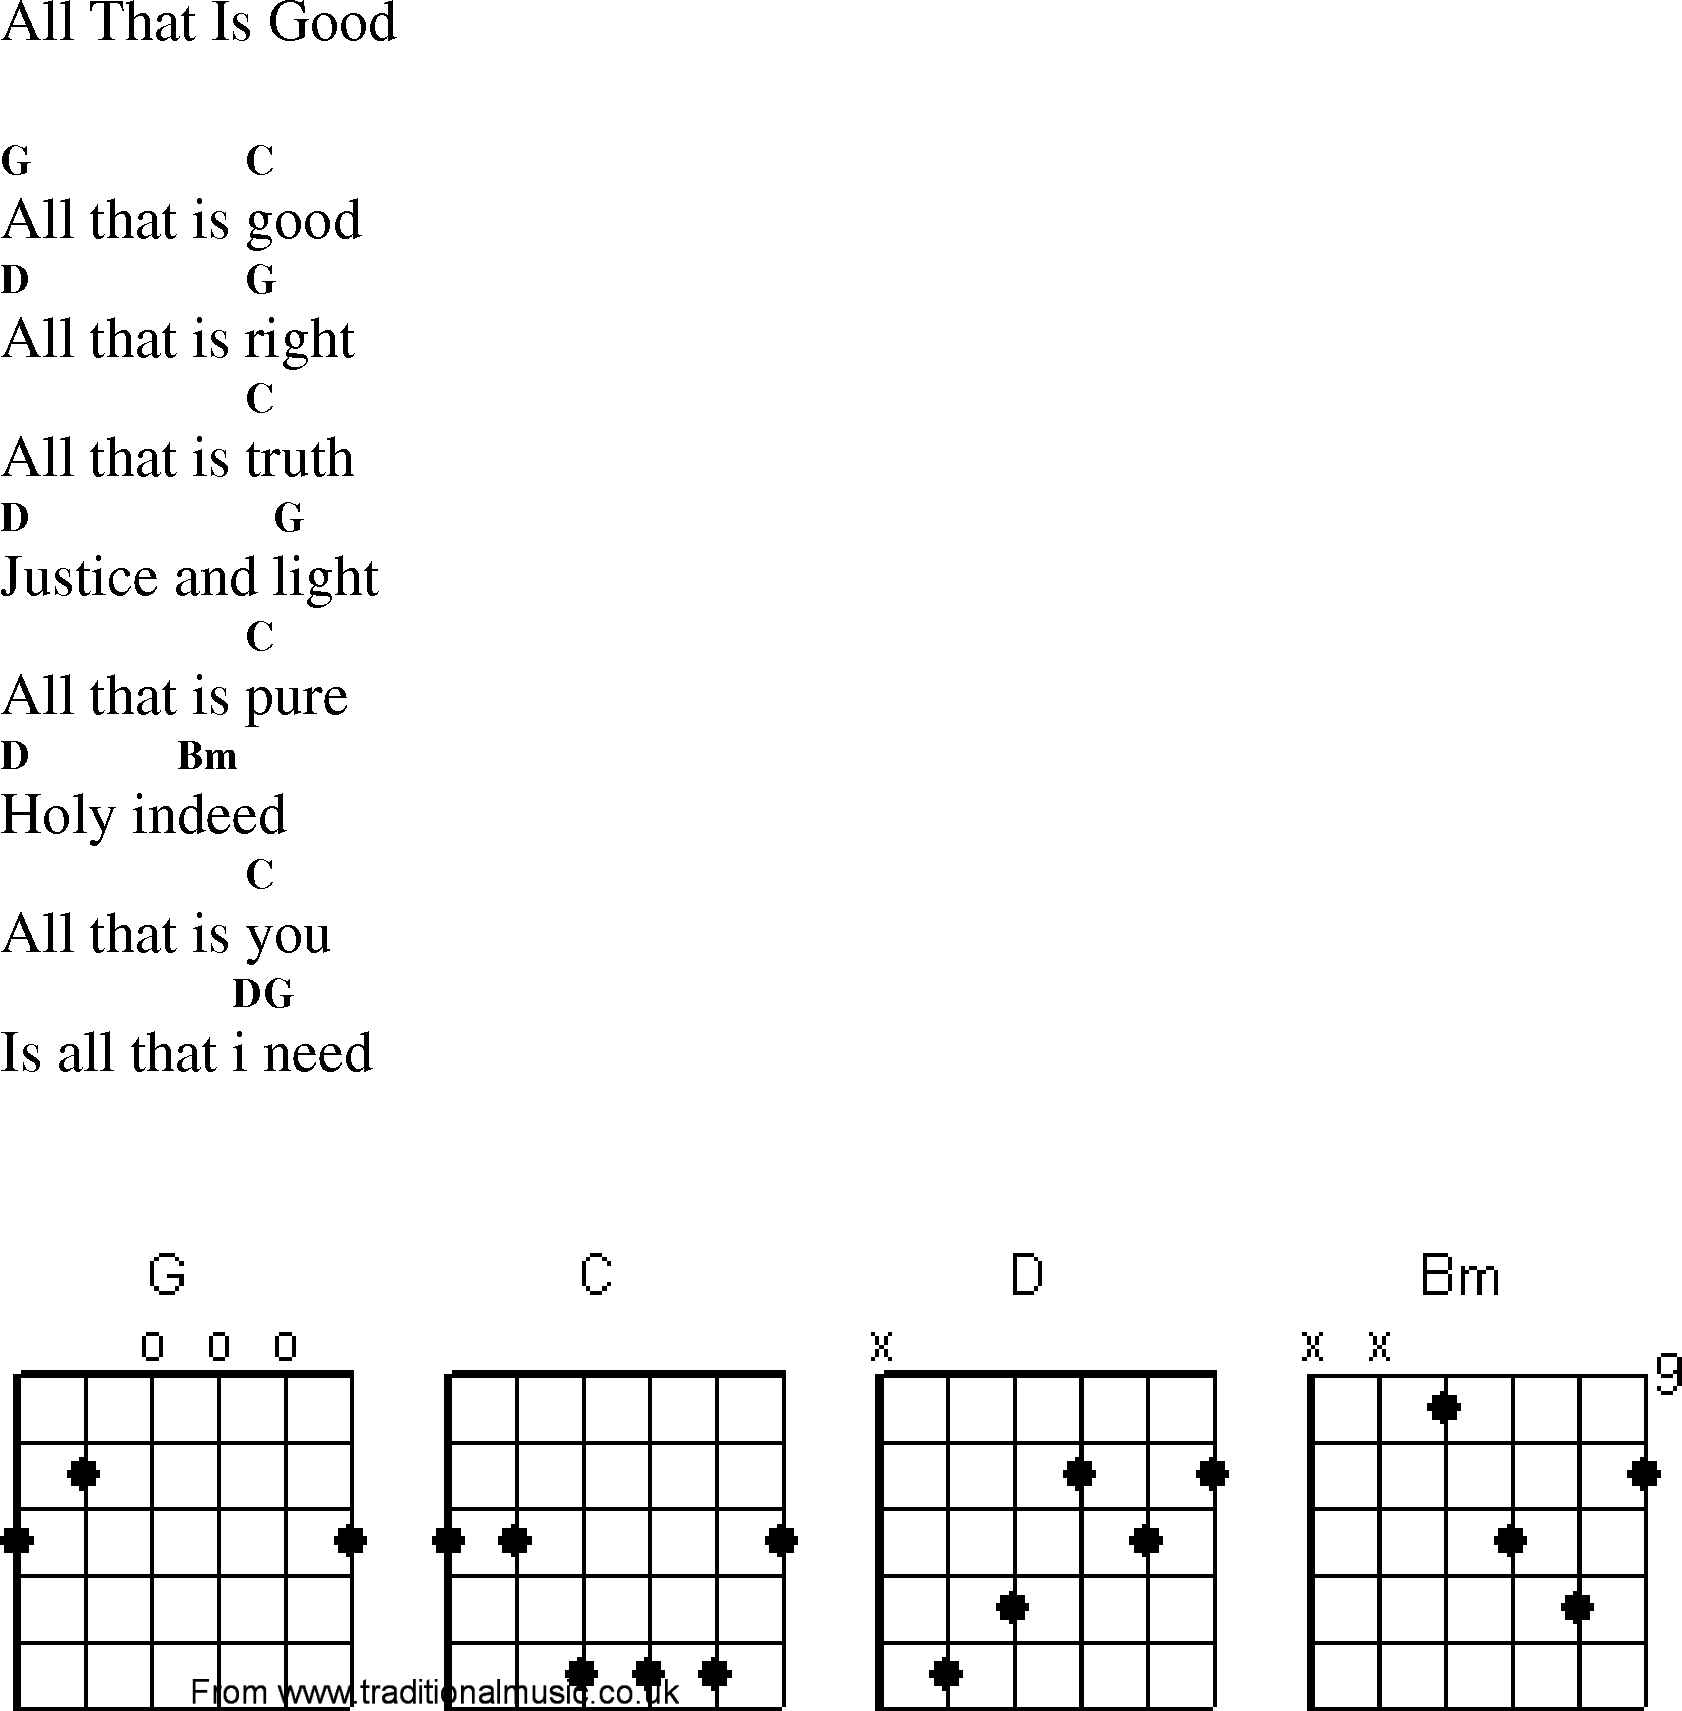 Gospel Song: all_that_is_good, lyrics and chords.